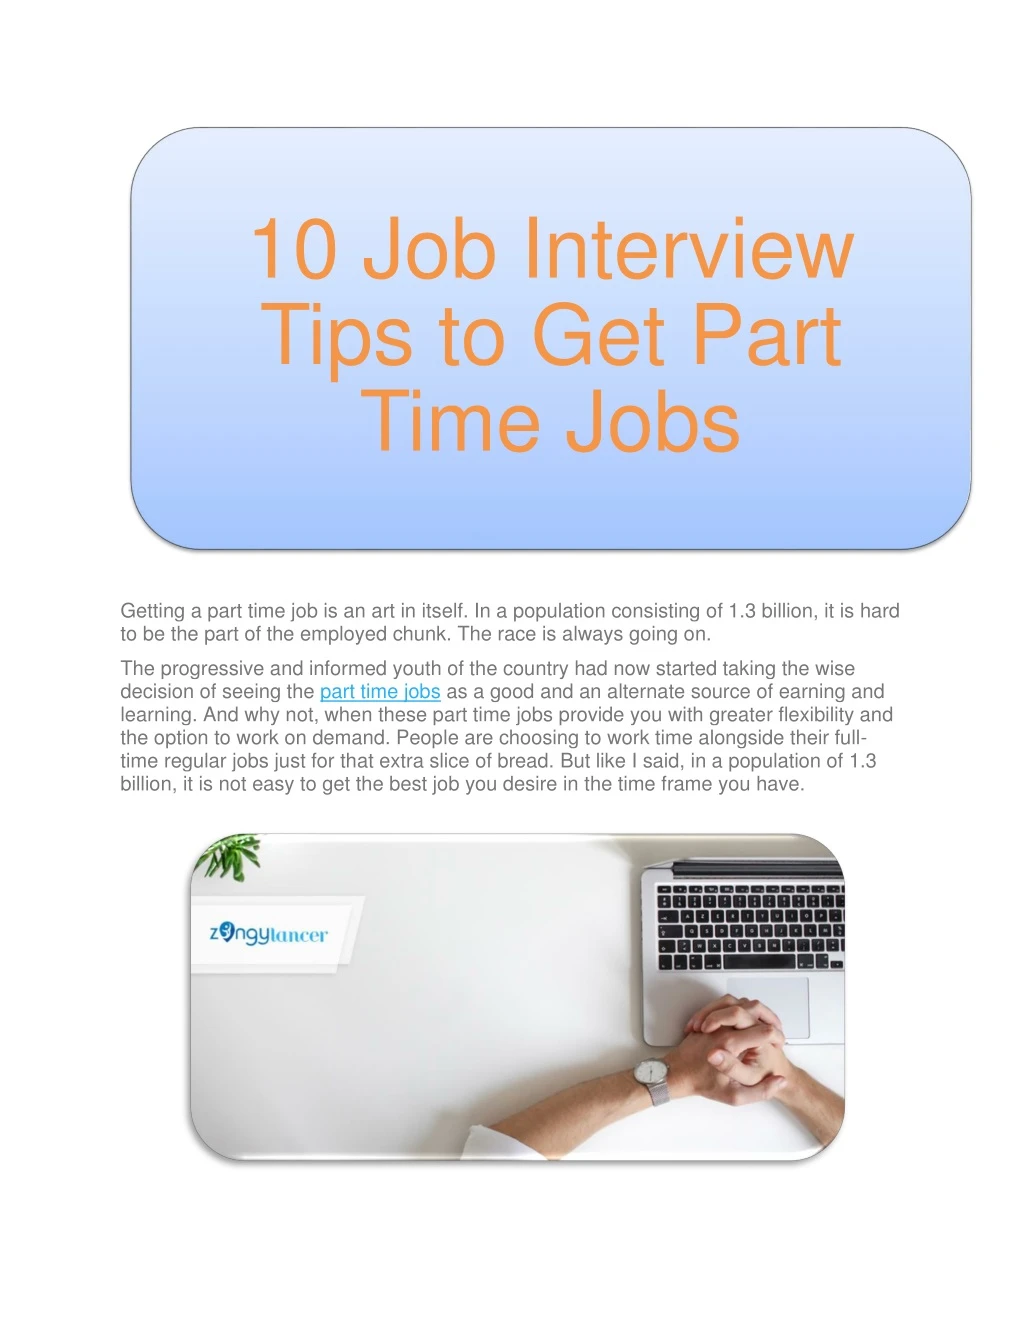 10 job interview tips to get part time jobs